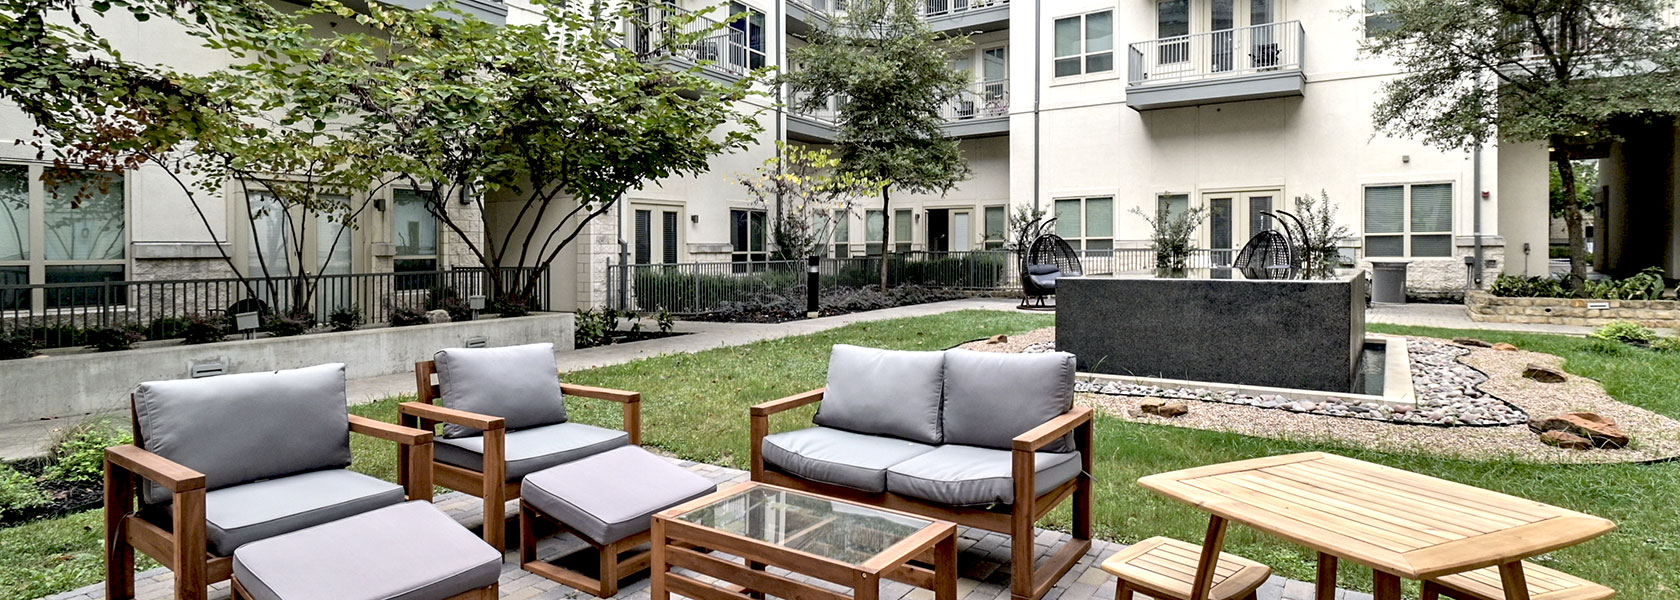 Looking down at grey cushioned outdoor furniture and a wooden table set sitting before the black, square fountain in the Zen Courtyard. The apartment building is seen behind.